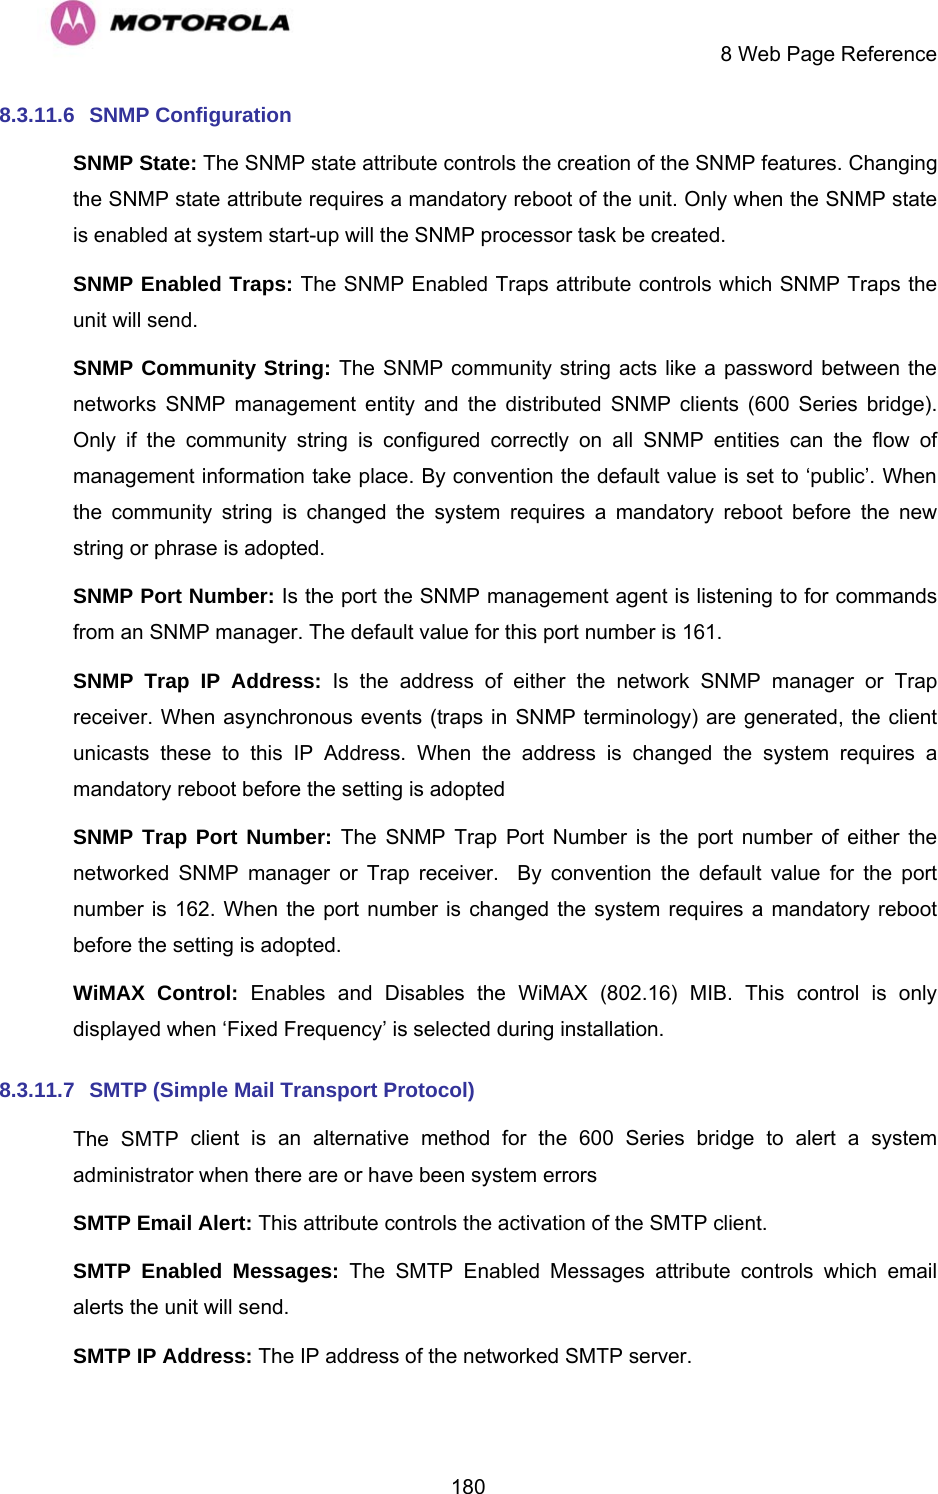     8 Web Page Reference  1808.3.11.6  SNMP Configuration SNMP State: The SNMP state attribute controls the creation of the SNMP features. Changing the SNMP state attribute requires a mandatory reboot of the unit. Only when the SNMP state is enabled at system start-up will the SNMP processor task be created. SNMP Enabled Traps: The SNMP Enabled Traps attribute controls which SNMP Traps the unit will send. SNMP Community String: The SNMP community string acts like a password between the networks SNMP management entity and the distributed SNMP clients (600 Series bridge). Only if the community string is configured correctly on all SNMP entities can the flow of management information take place. By convention the default value is set to ‘public’. When the community string is changed the system requires a mandatory reboot before the new string or phrase is adopted. SNMP Port Number: Is the port the SNMP management agent is listening to for commands from an SNMP manager. The default value for this port number is 161. SNMP Trap IP Address: Is the address of either the network SNMP manager or Trap receiver. When asynchronous events (traps in SNMP terminology) are generated, the client unicasts these to this IP Address. When the address is changed the system requires a mandatory reboot before the setting is adopted SNMP Trap Port Number: The SNMP Trap Port Number is the port number of either the networked SNMP manager or Trap receiver.  By convention the default value for the port number is 162. When the port number is changed the system requires a mandatory reboot before the setting is adopted. WiMAX Control: Enables and Disables the WiMAX (802.16) MIB. This control is only displayed when ‘Fixed Frequency’ is selected during installation. 8.3.11.7  SMTP (Simple Mail Transport Protocol) The SMTP client is an alternative method for the 600 Series bridge to alert a system administrator when there are or have been system errors SMTP Email Alert: This attribute controls the activation of the SMTP client. SMTP Enabled Messages: The SMTP Enabled Messages attribute controls which email alerts the unit will send. SMTP IP Address: The IP address of the networked SMTP server. 